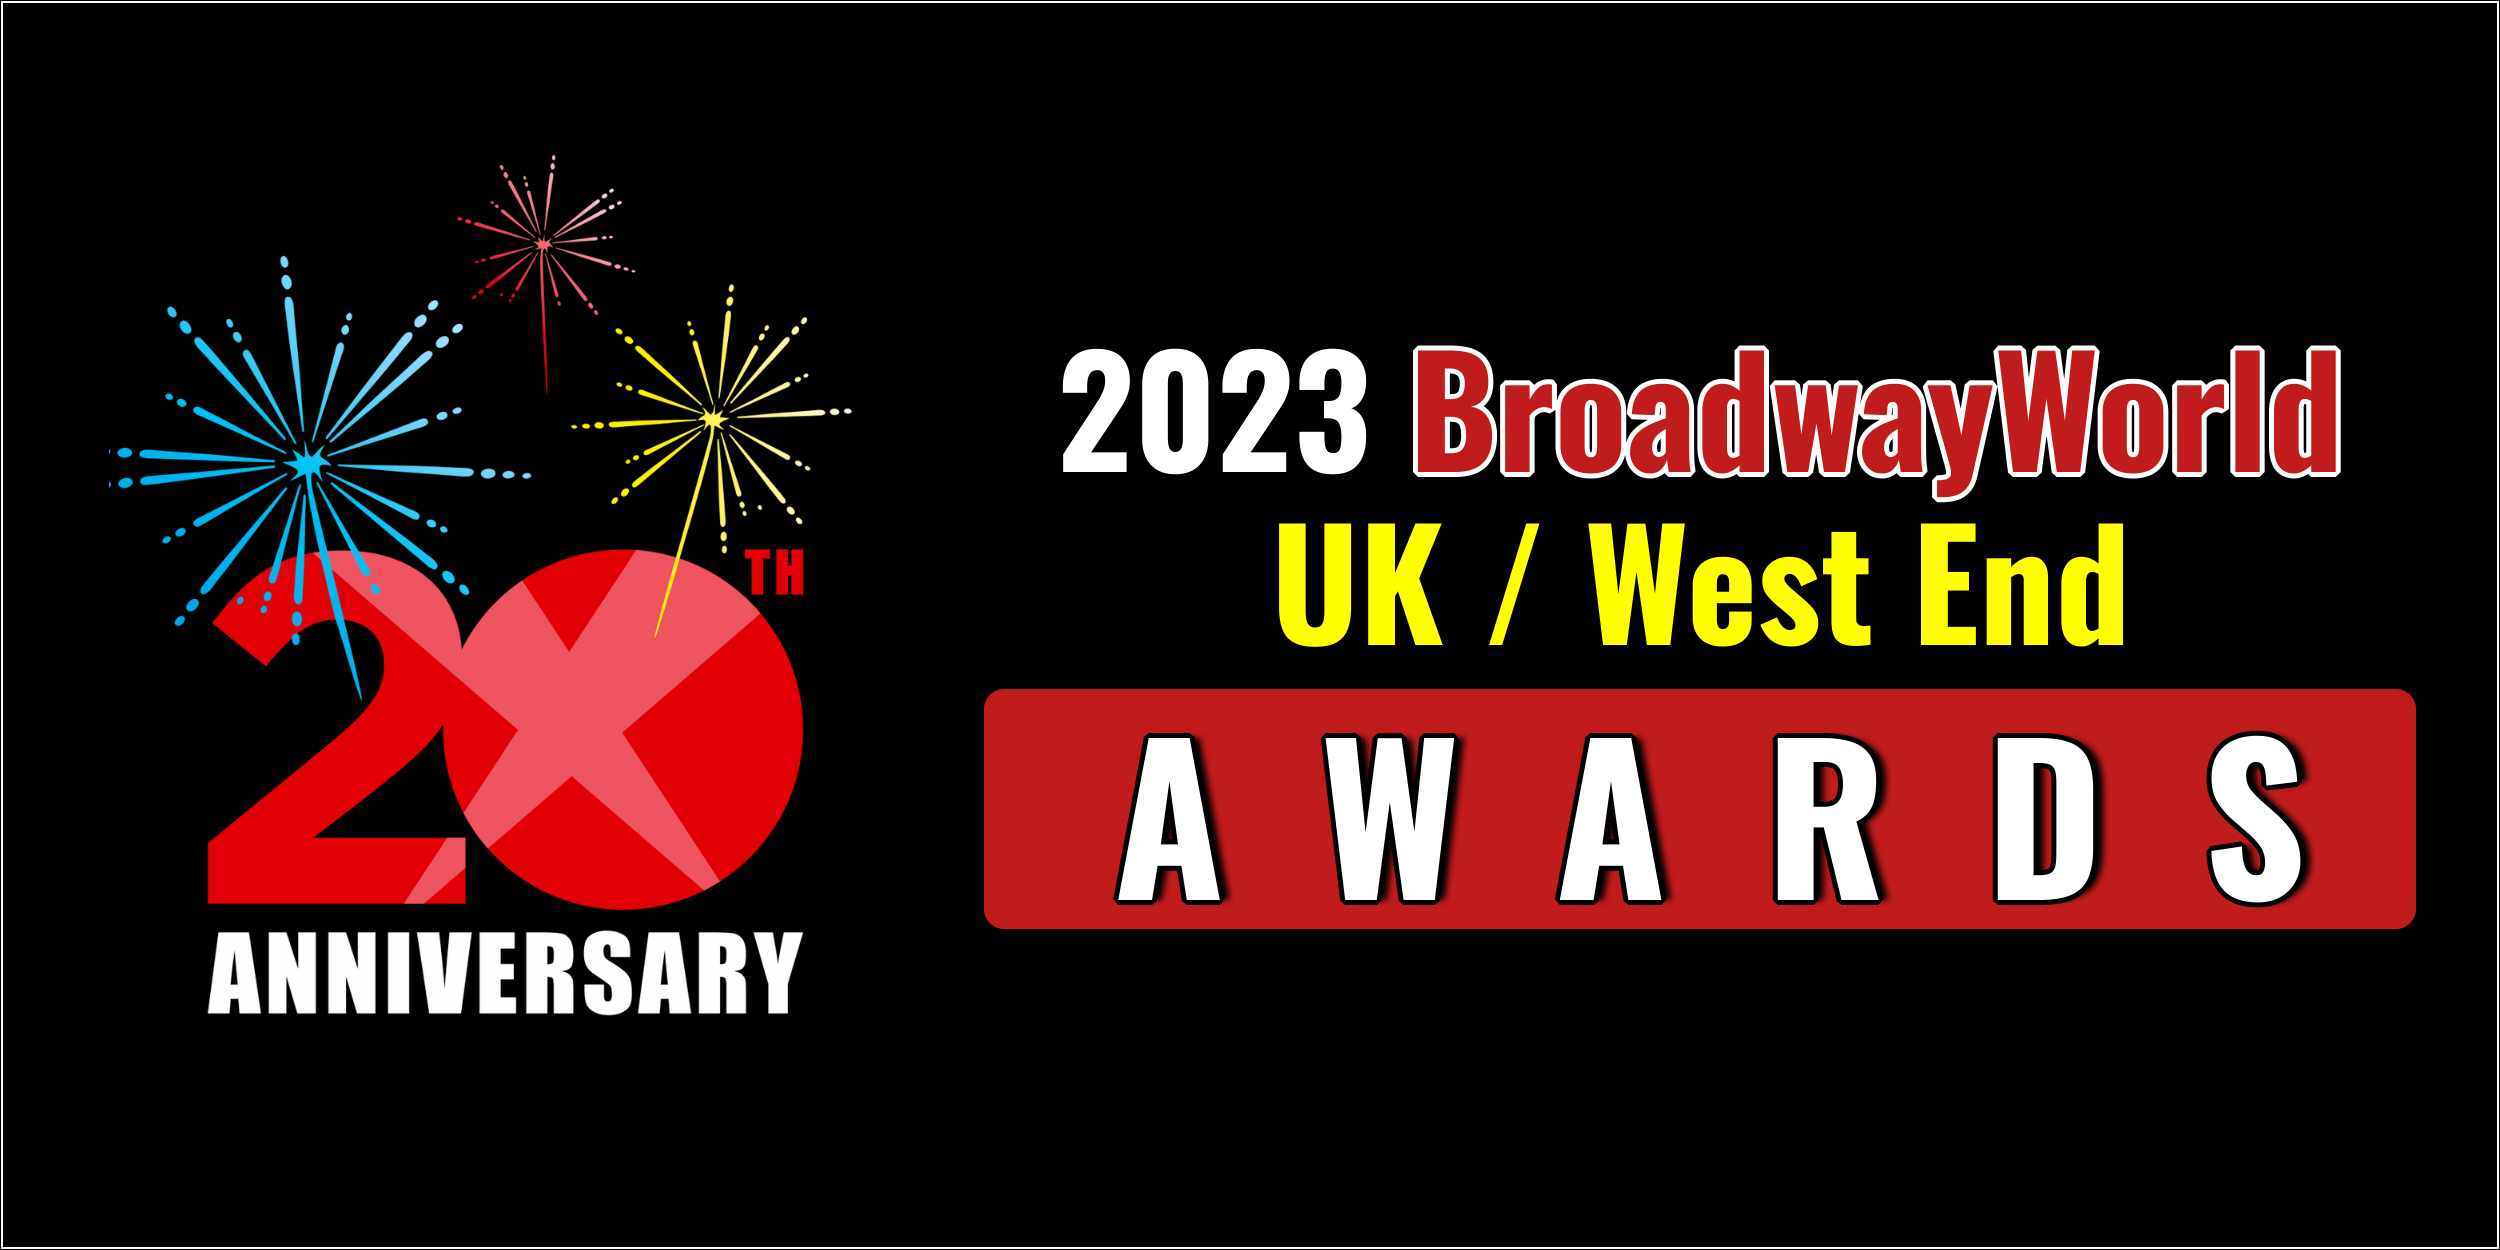 Latest Standings Announced For The 2023 BroadwayWorld UK / West End Awards! 